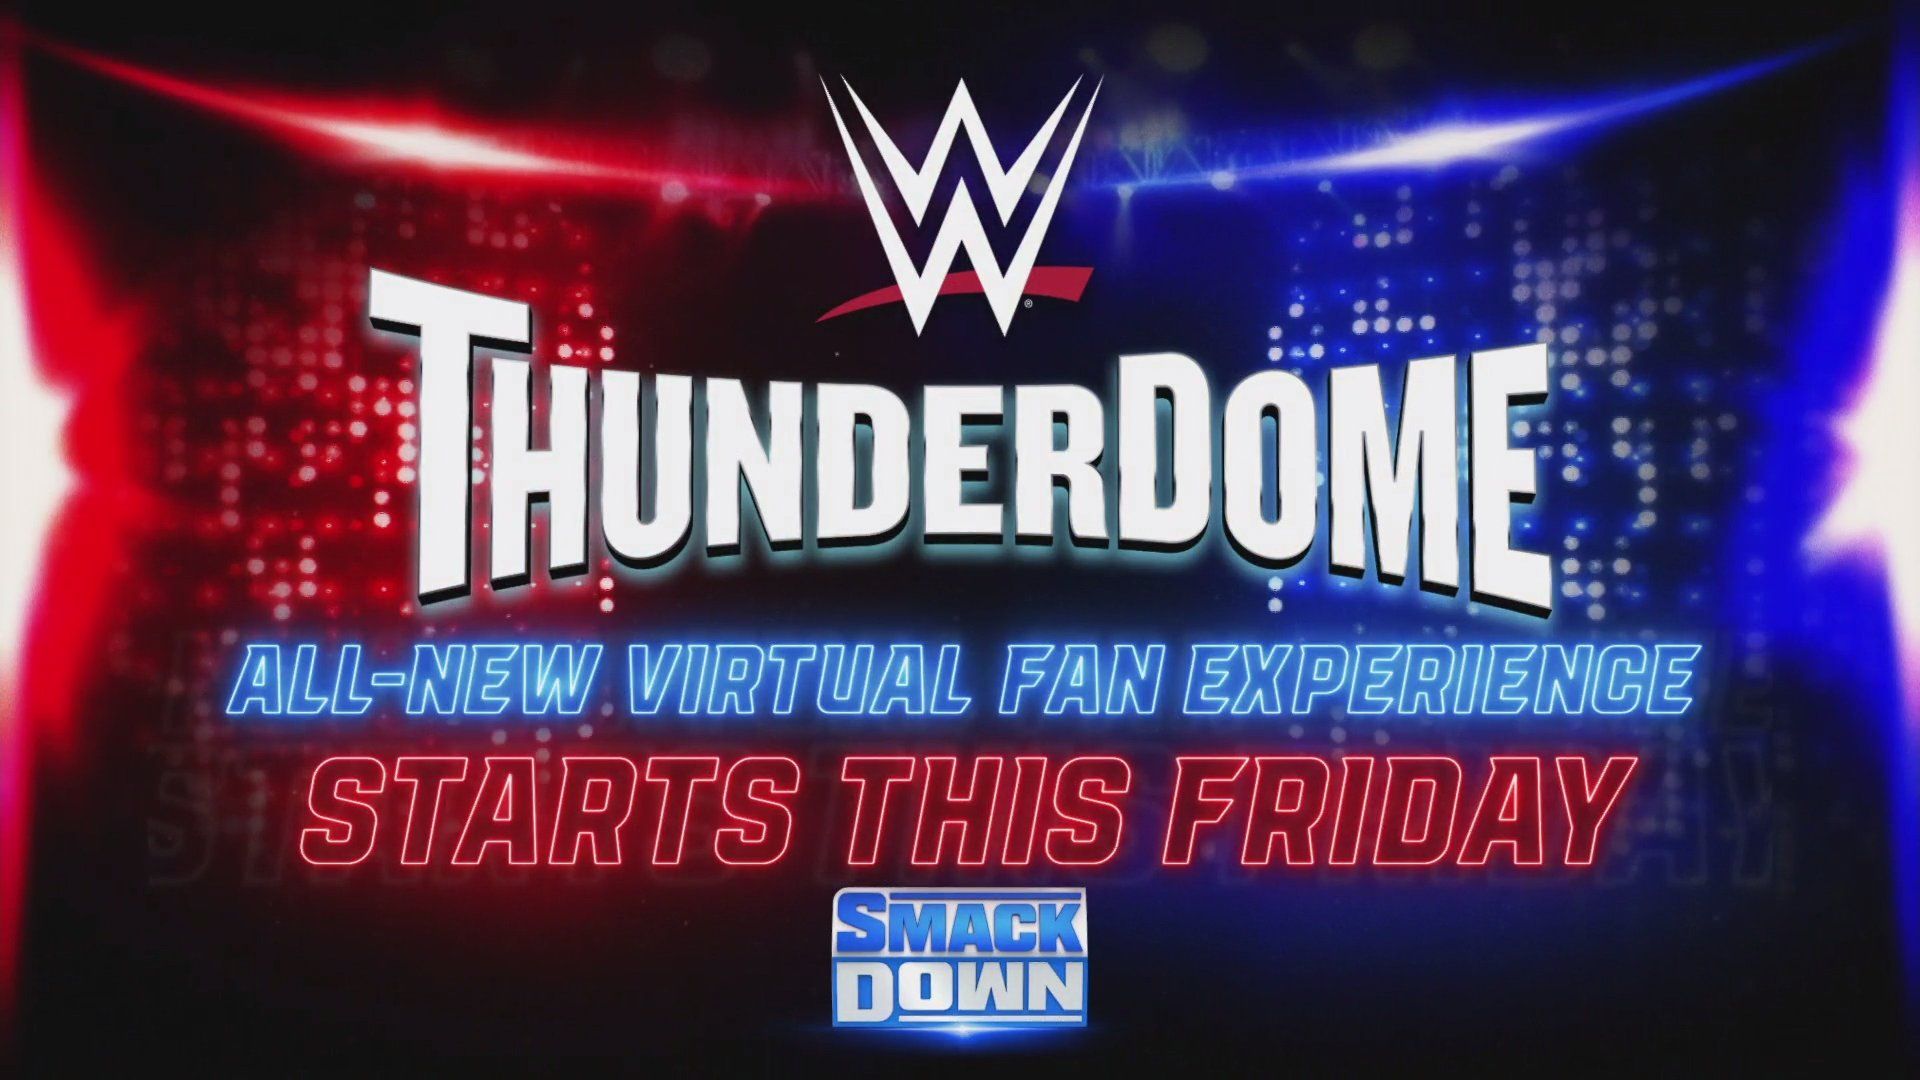 Guidelines For Fans Appearing On WWE's ThunderDome Revealed